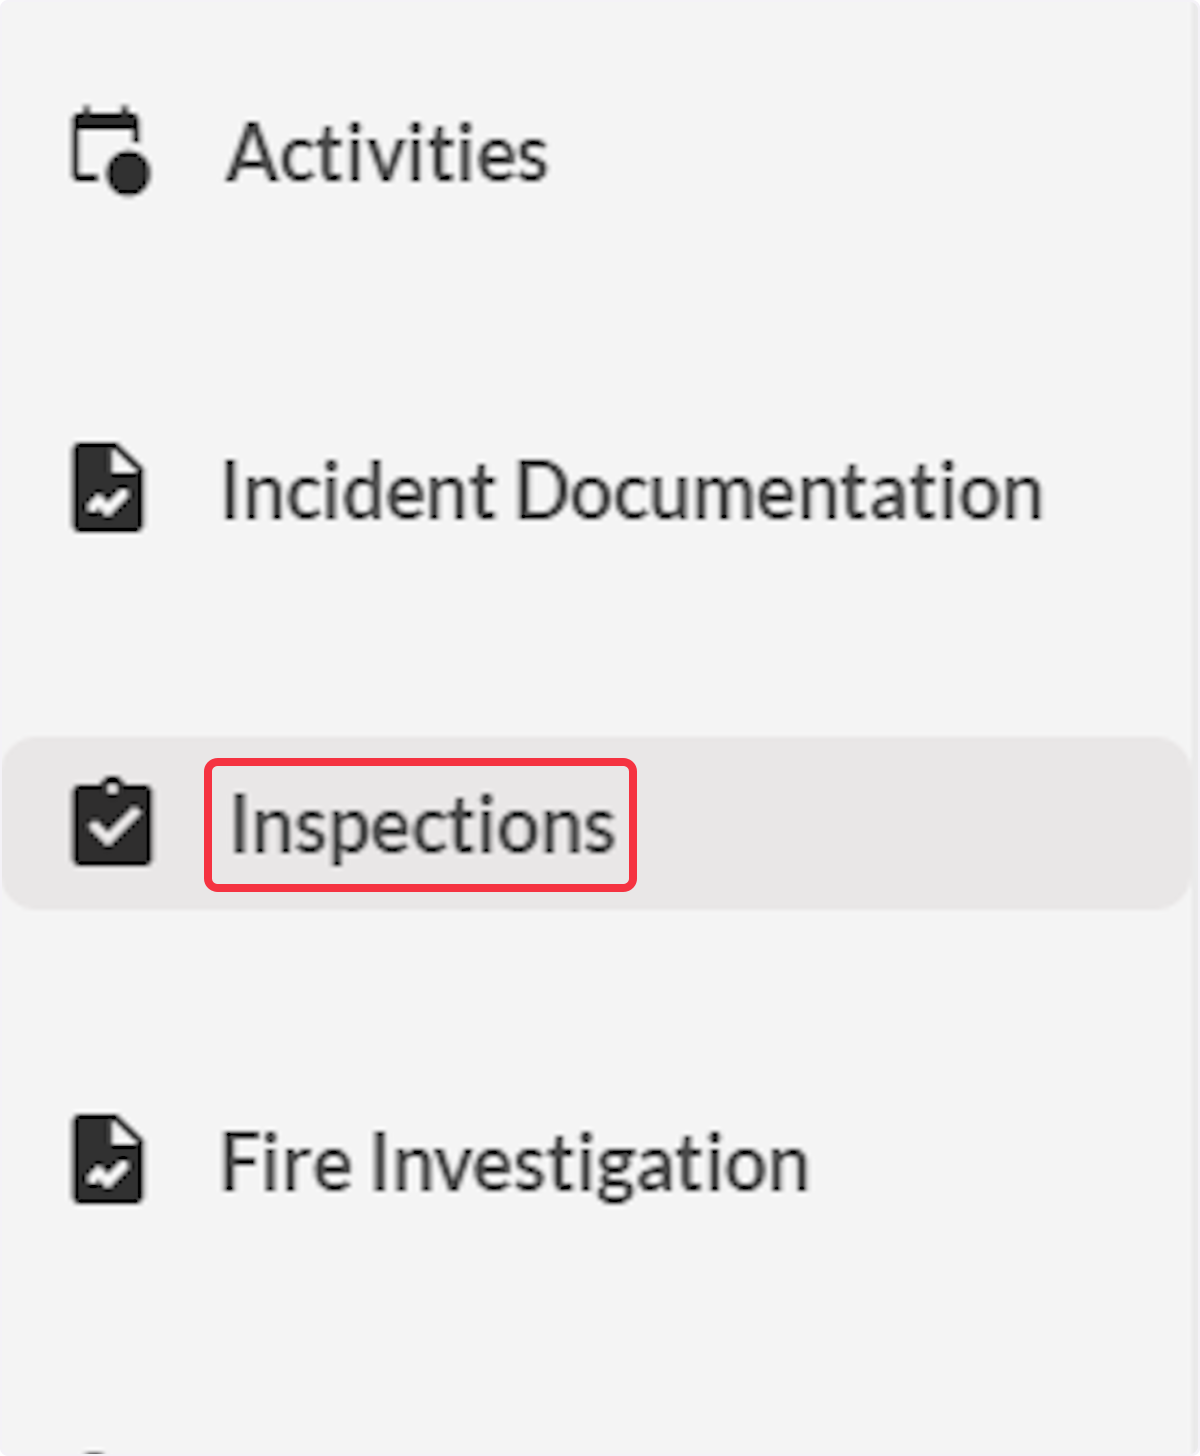 Click on Inspections